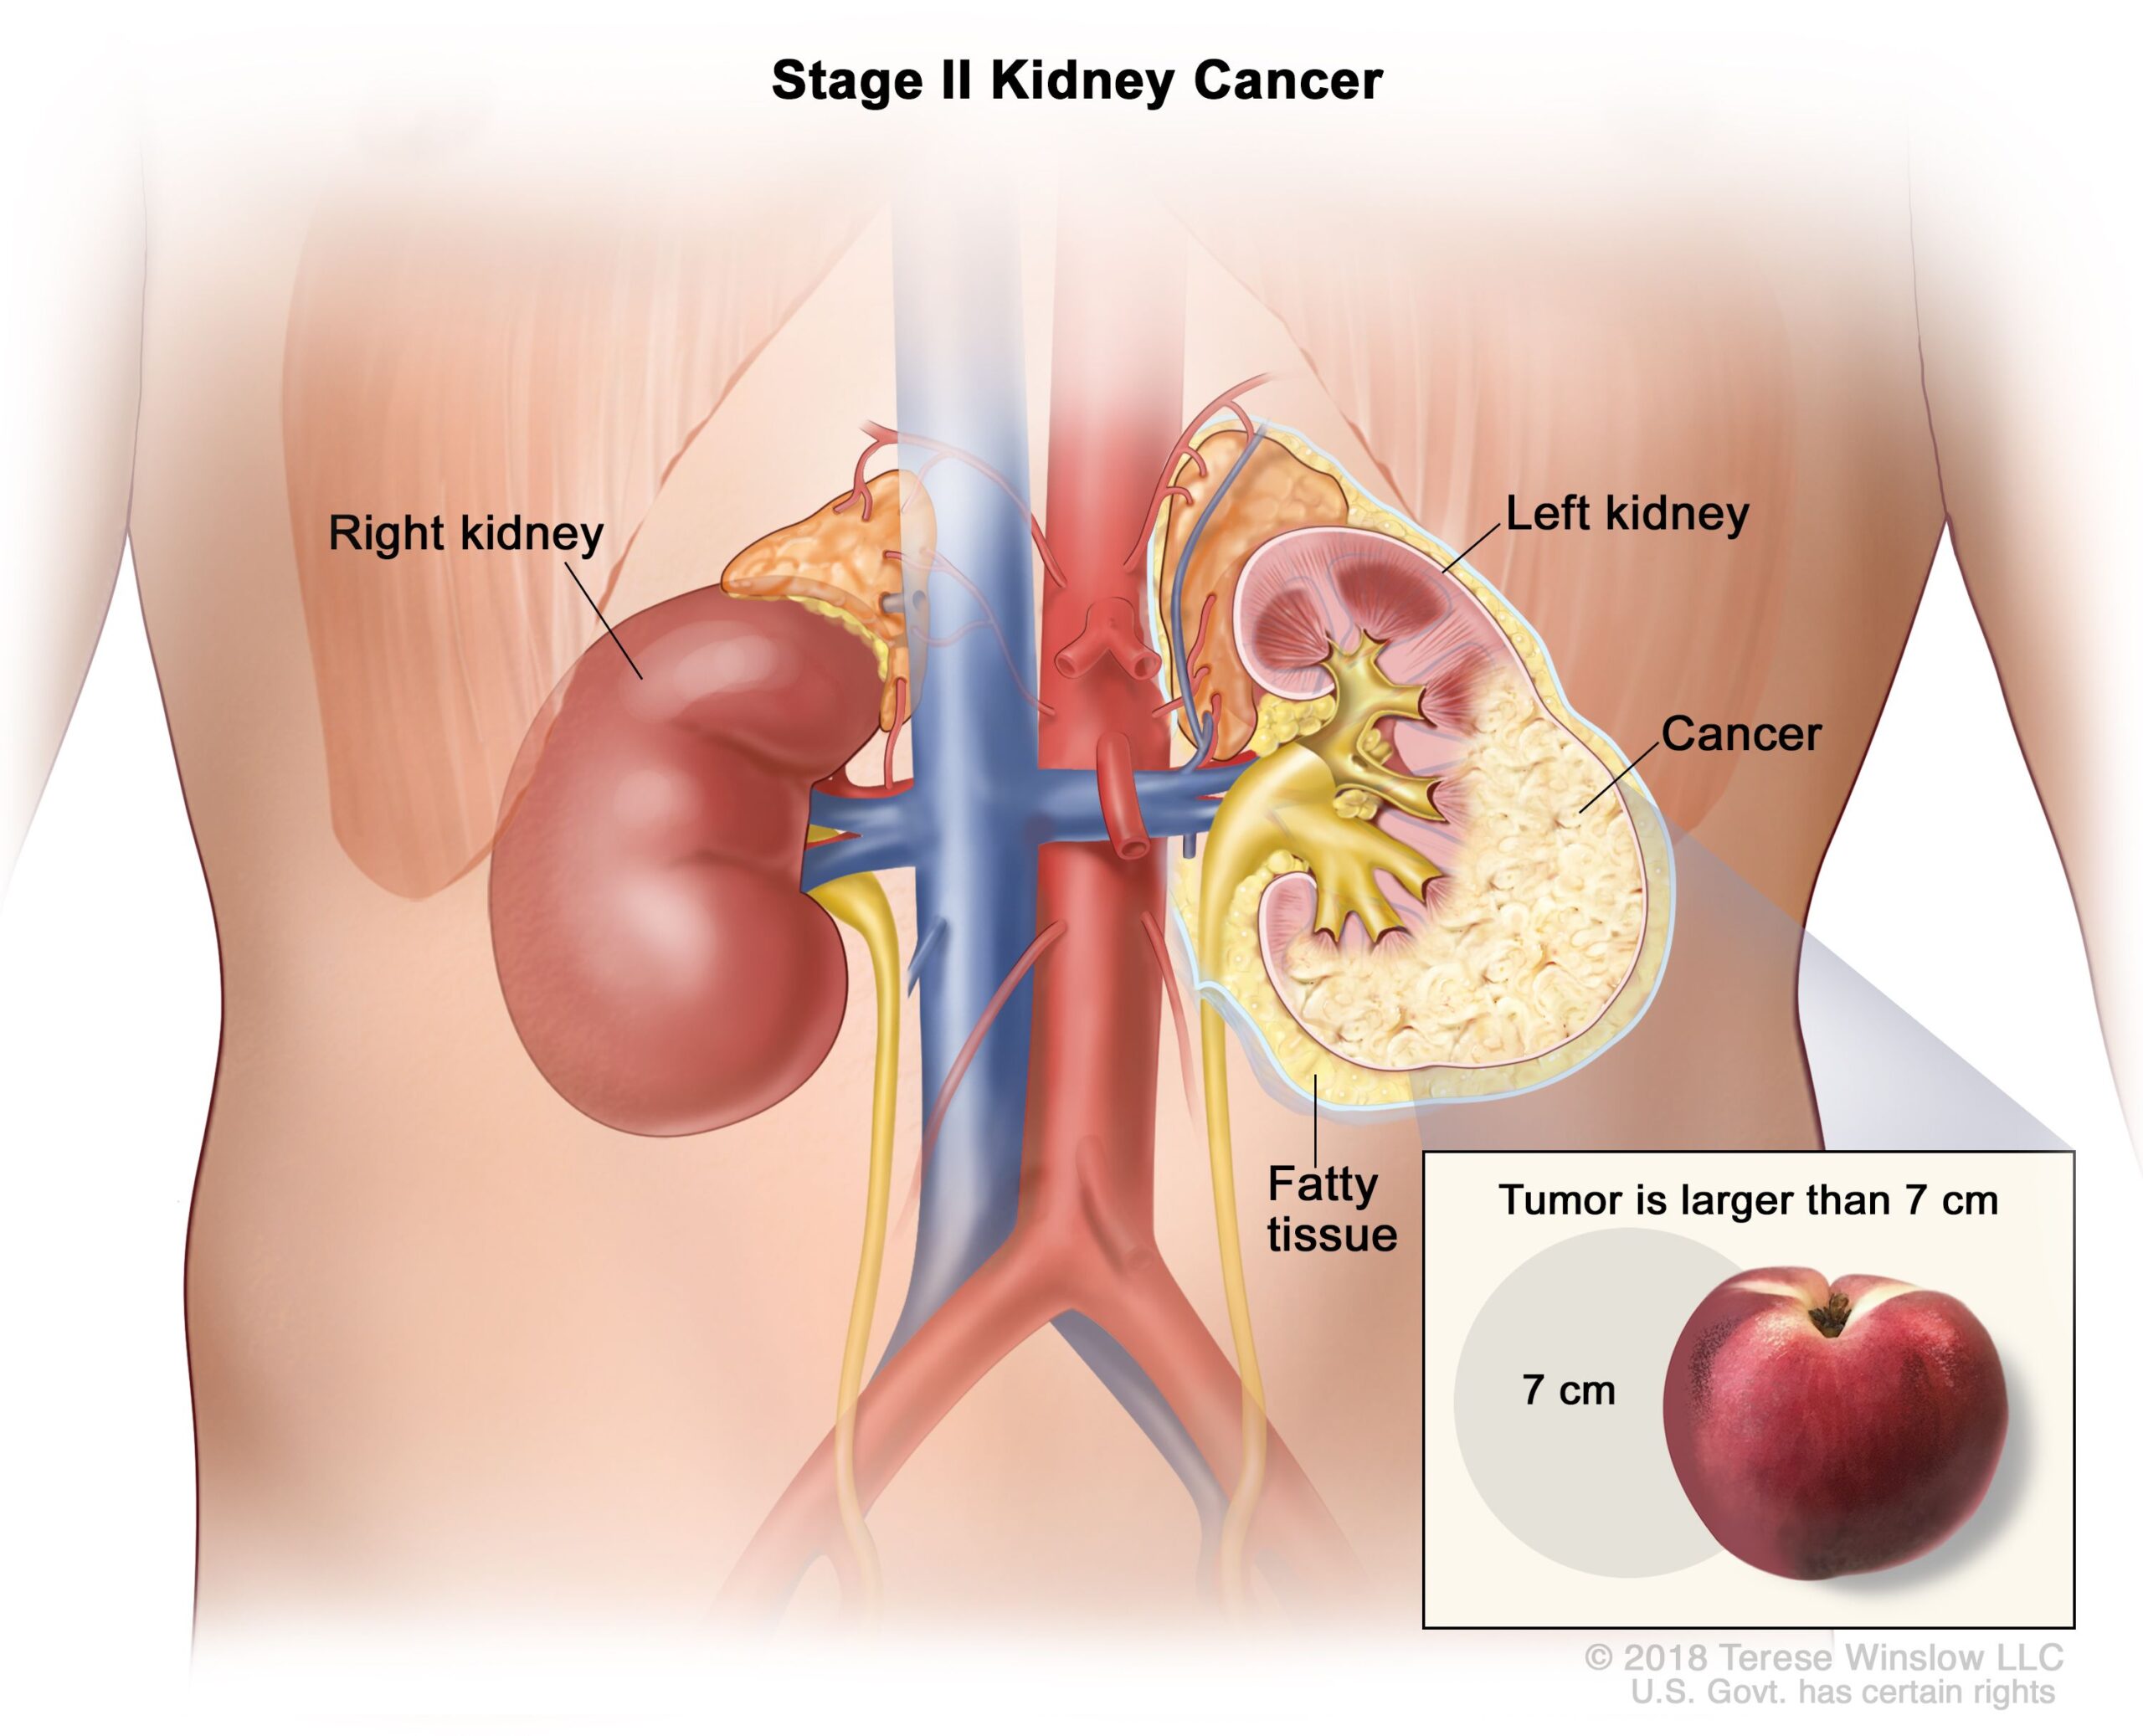 Renal cell carcinoma treatment